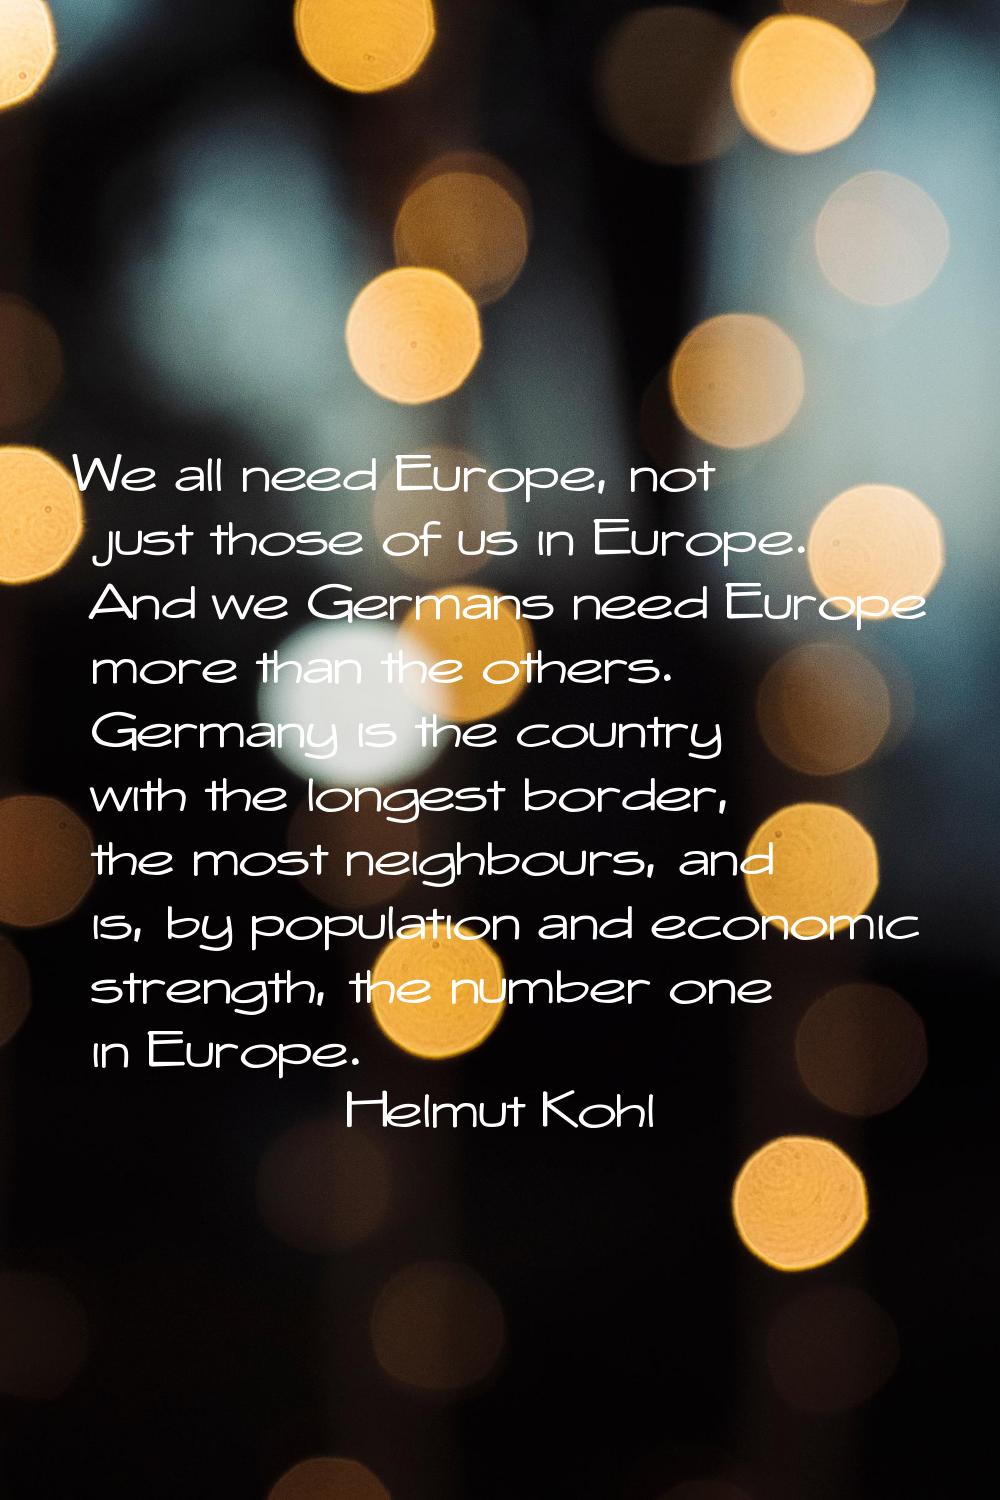 We all need Europe, not just those of us in Europe. And we Germans need Europe more than the others